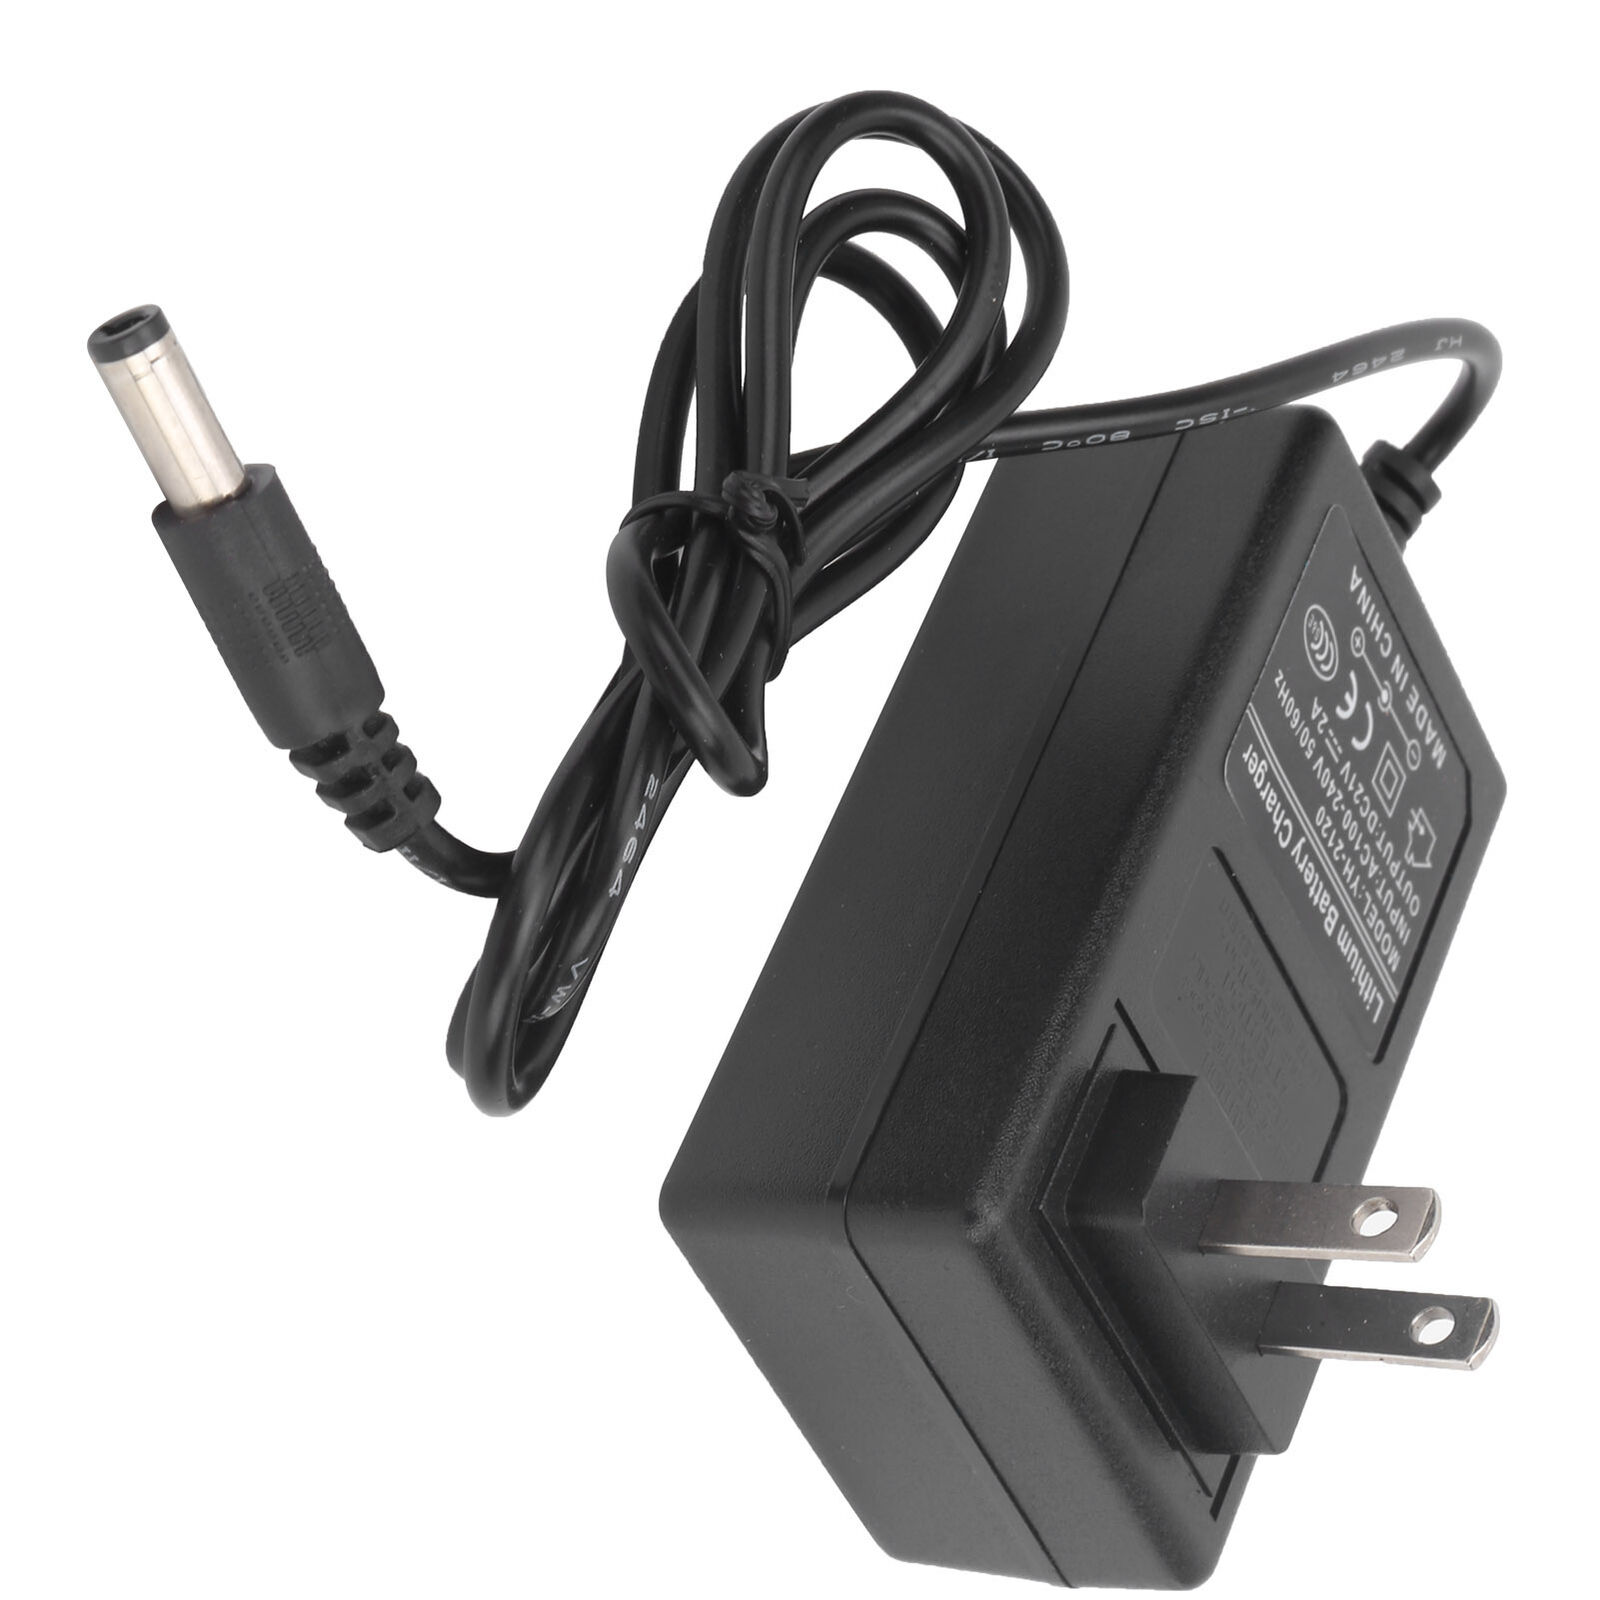 for Denon HEOS 5 HEOS5 Wireless Speaker HEOS System Ac adapter Switching Charger Type AC/DC adapter Wall Charger Compat